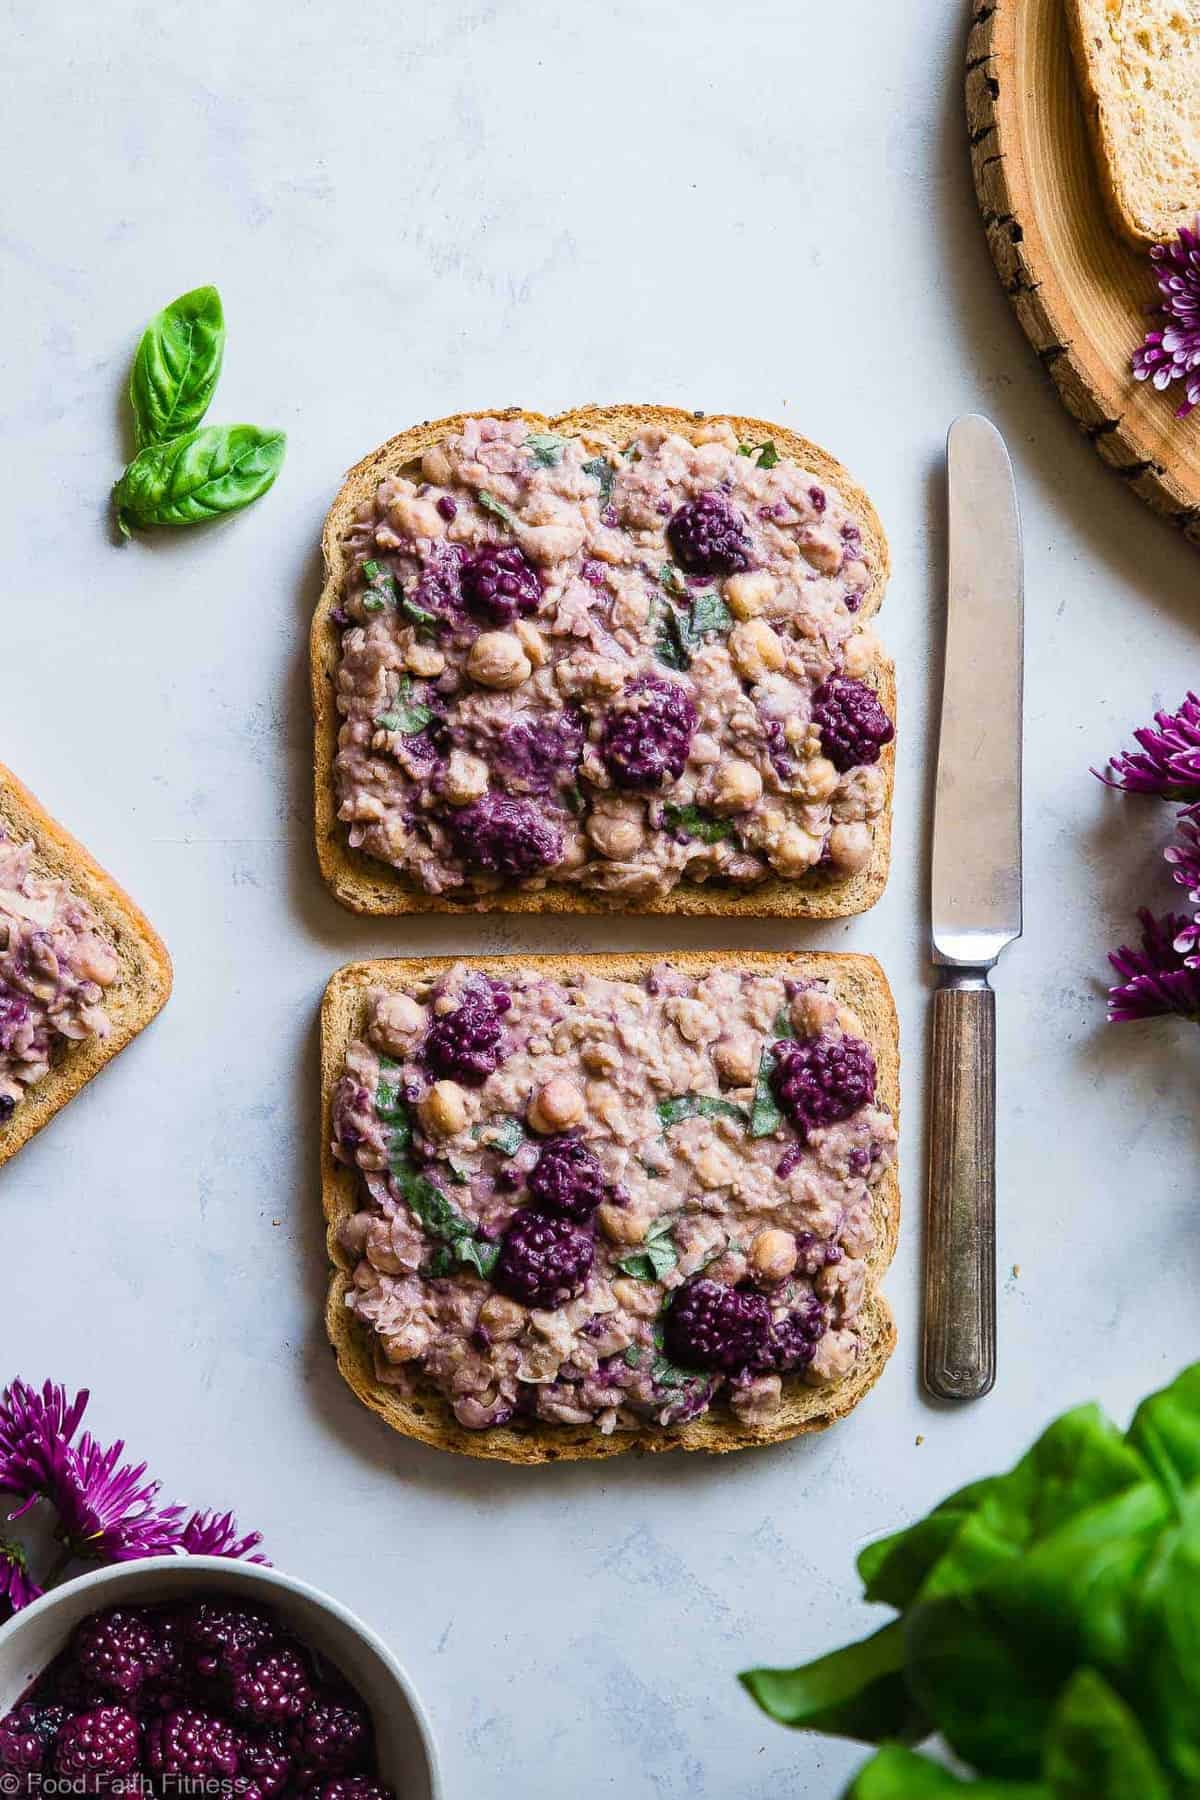 Blackberry Balsamic Vegan Chickpea Salad Sandwich - This simple sandwich has tangy notes of balsamic vinegar, sweet blackberries and fresh basil! It's a healthy, dairy and gluten free lunch that's packed with plant protein and fiber to keep you FULL! | #Foodfaithfitness | #Glutenfree #Vegan #Healthy #MealPrep #Dairyfree